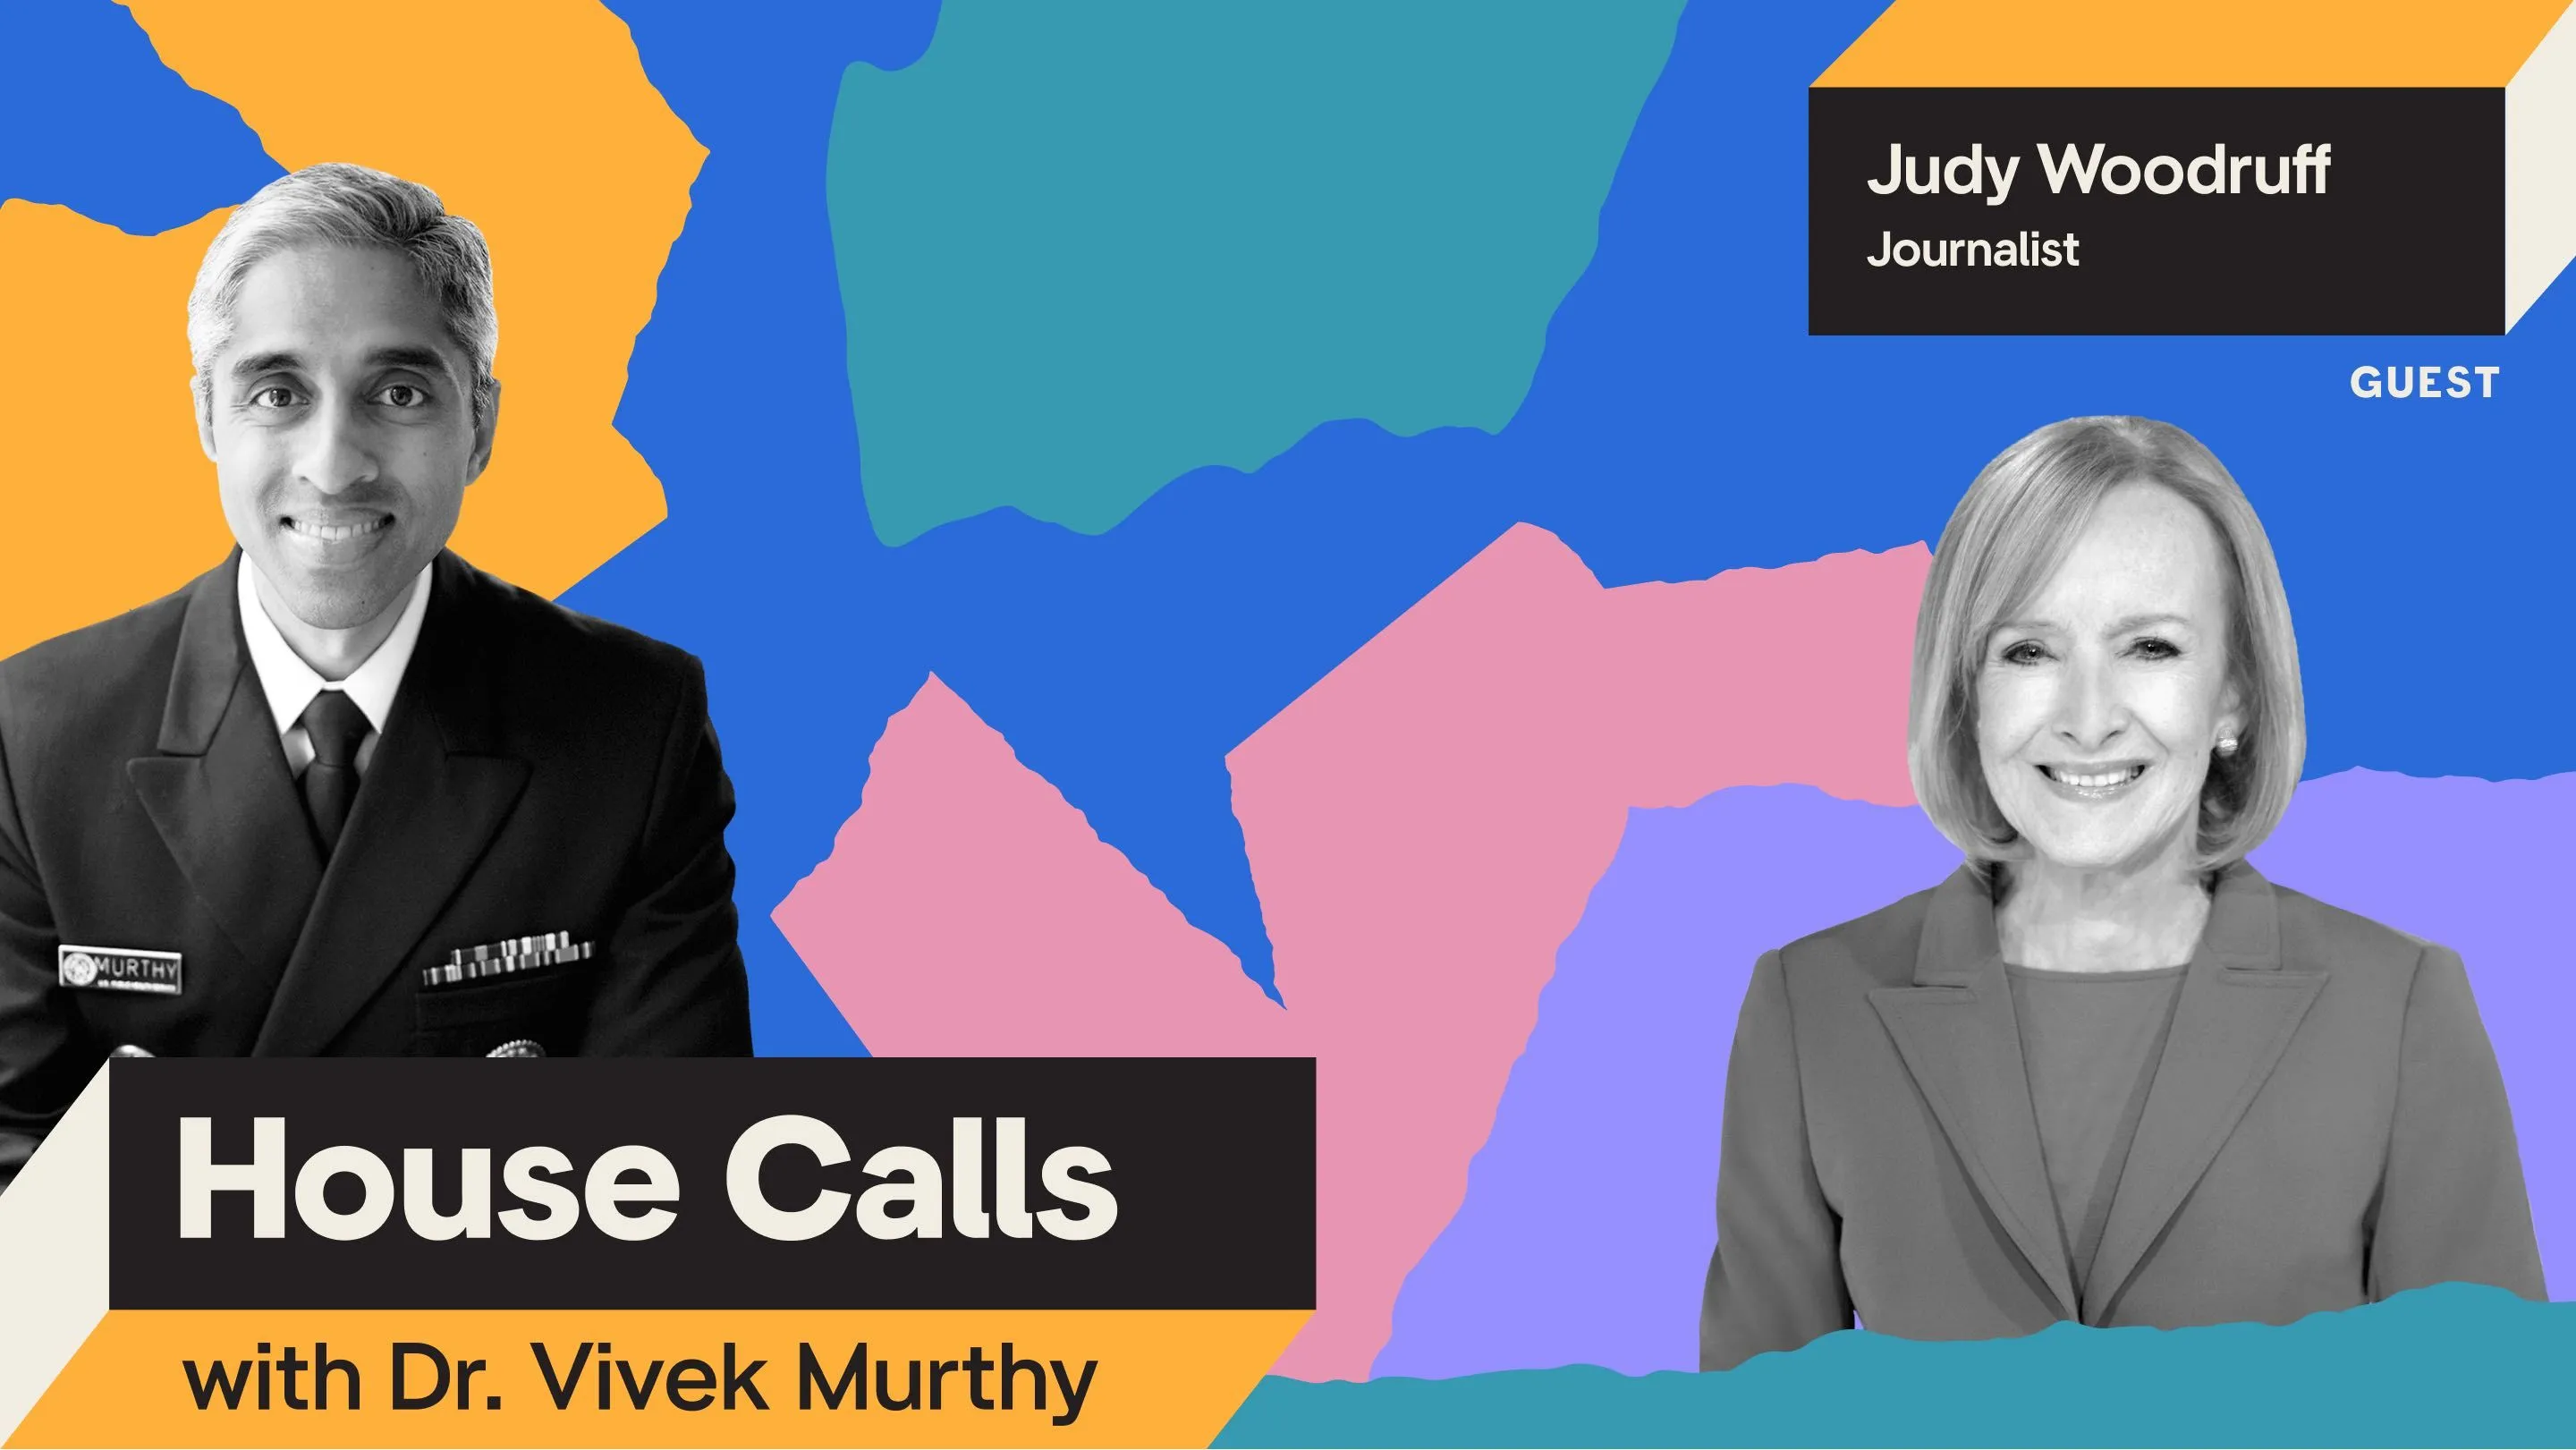 Black and white portraits of Surgeon General Vivek Murthy and Judy Woodruff with a colorful background.